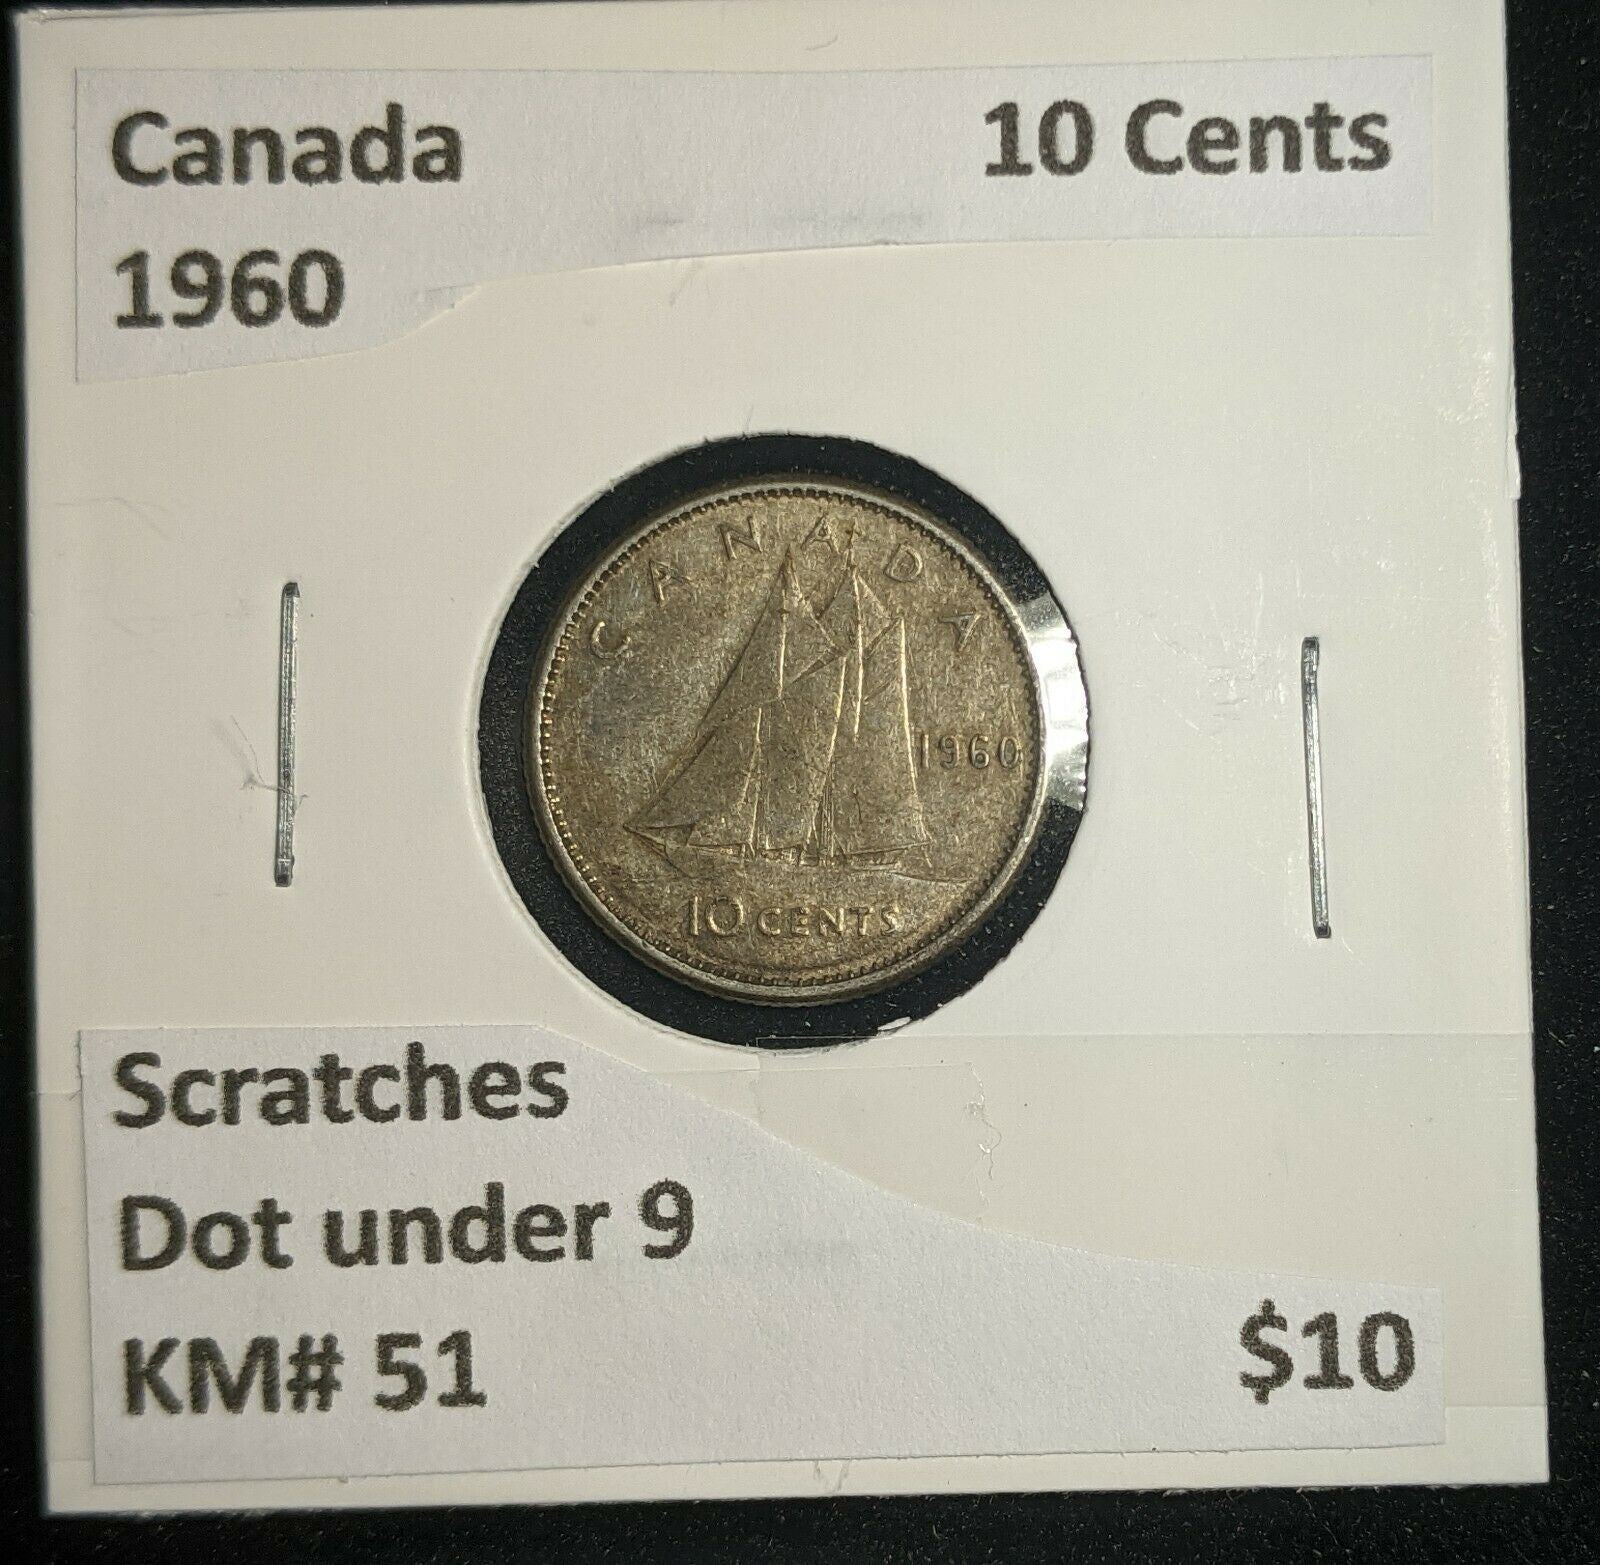 Canada 1960 Dot under 9 10 Cents KM# 51 Scratches #073